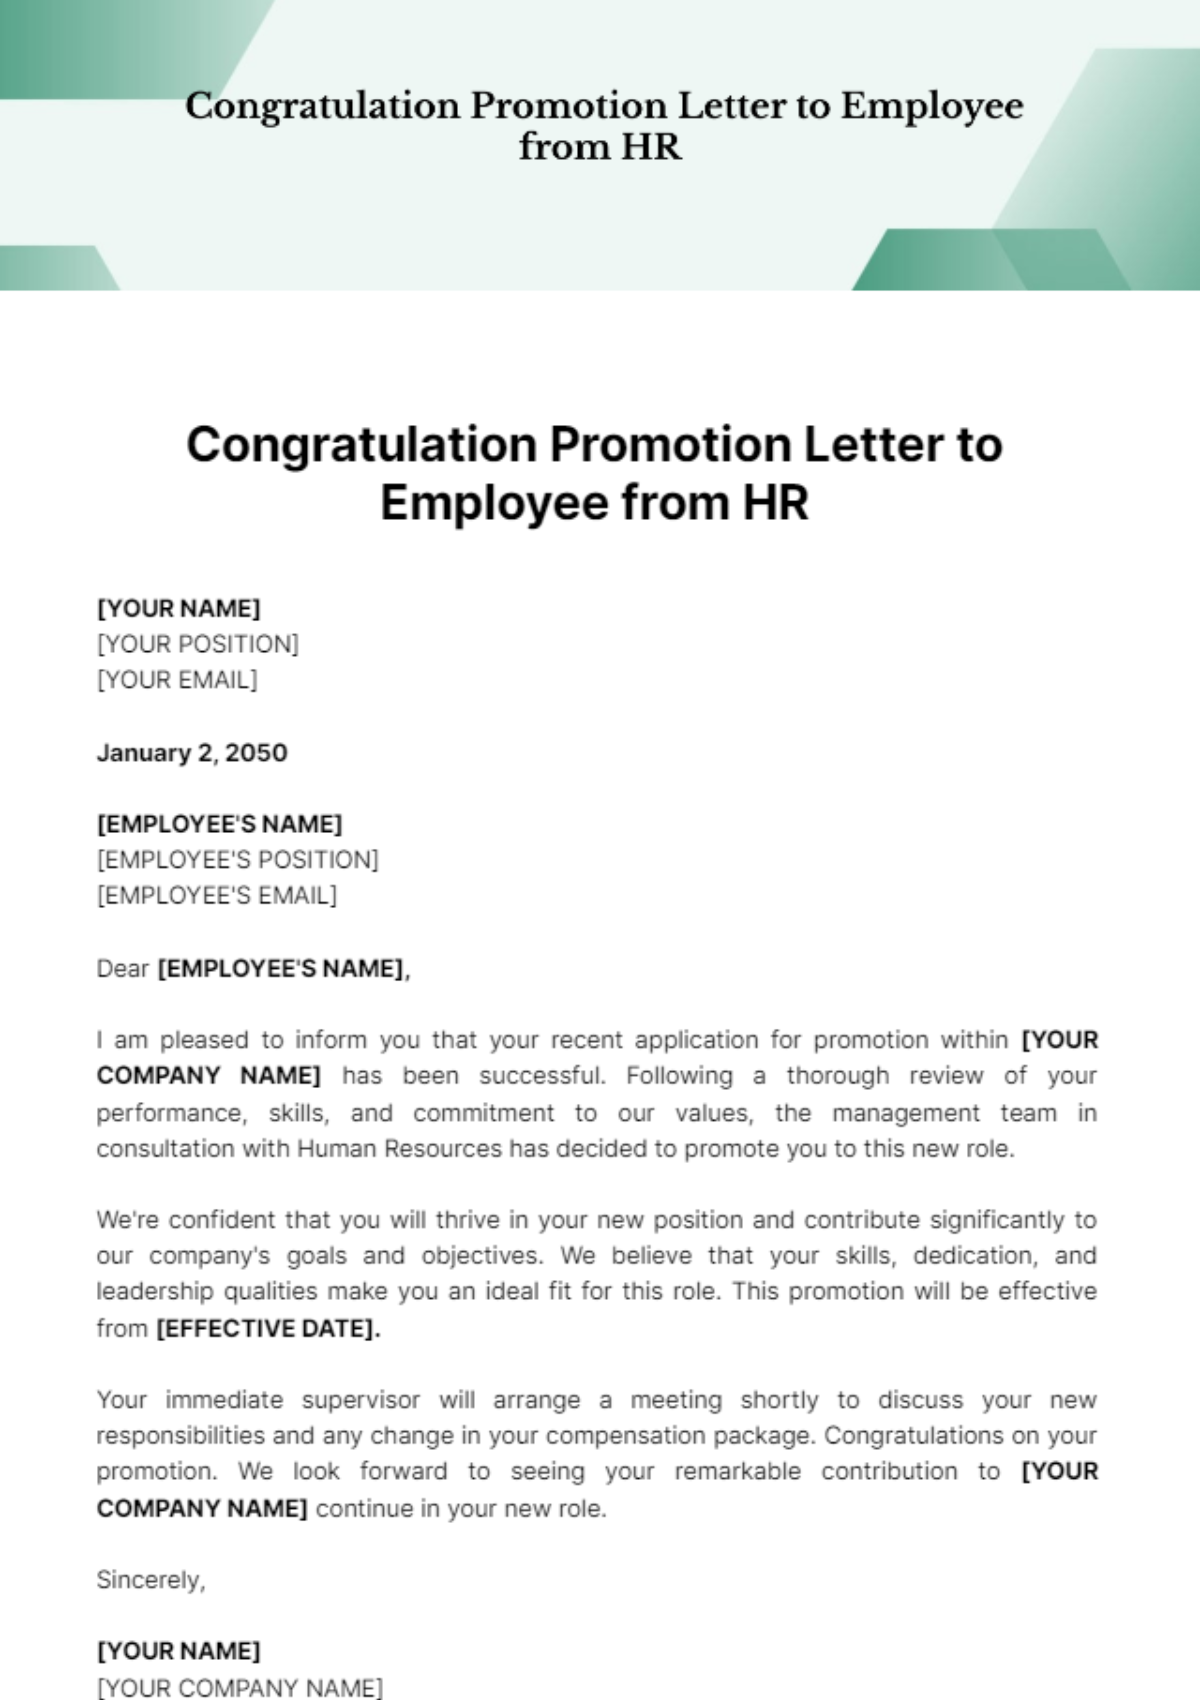 Congratulation Promotion Letter to Employee from HR Template